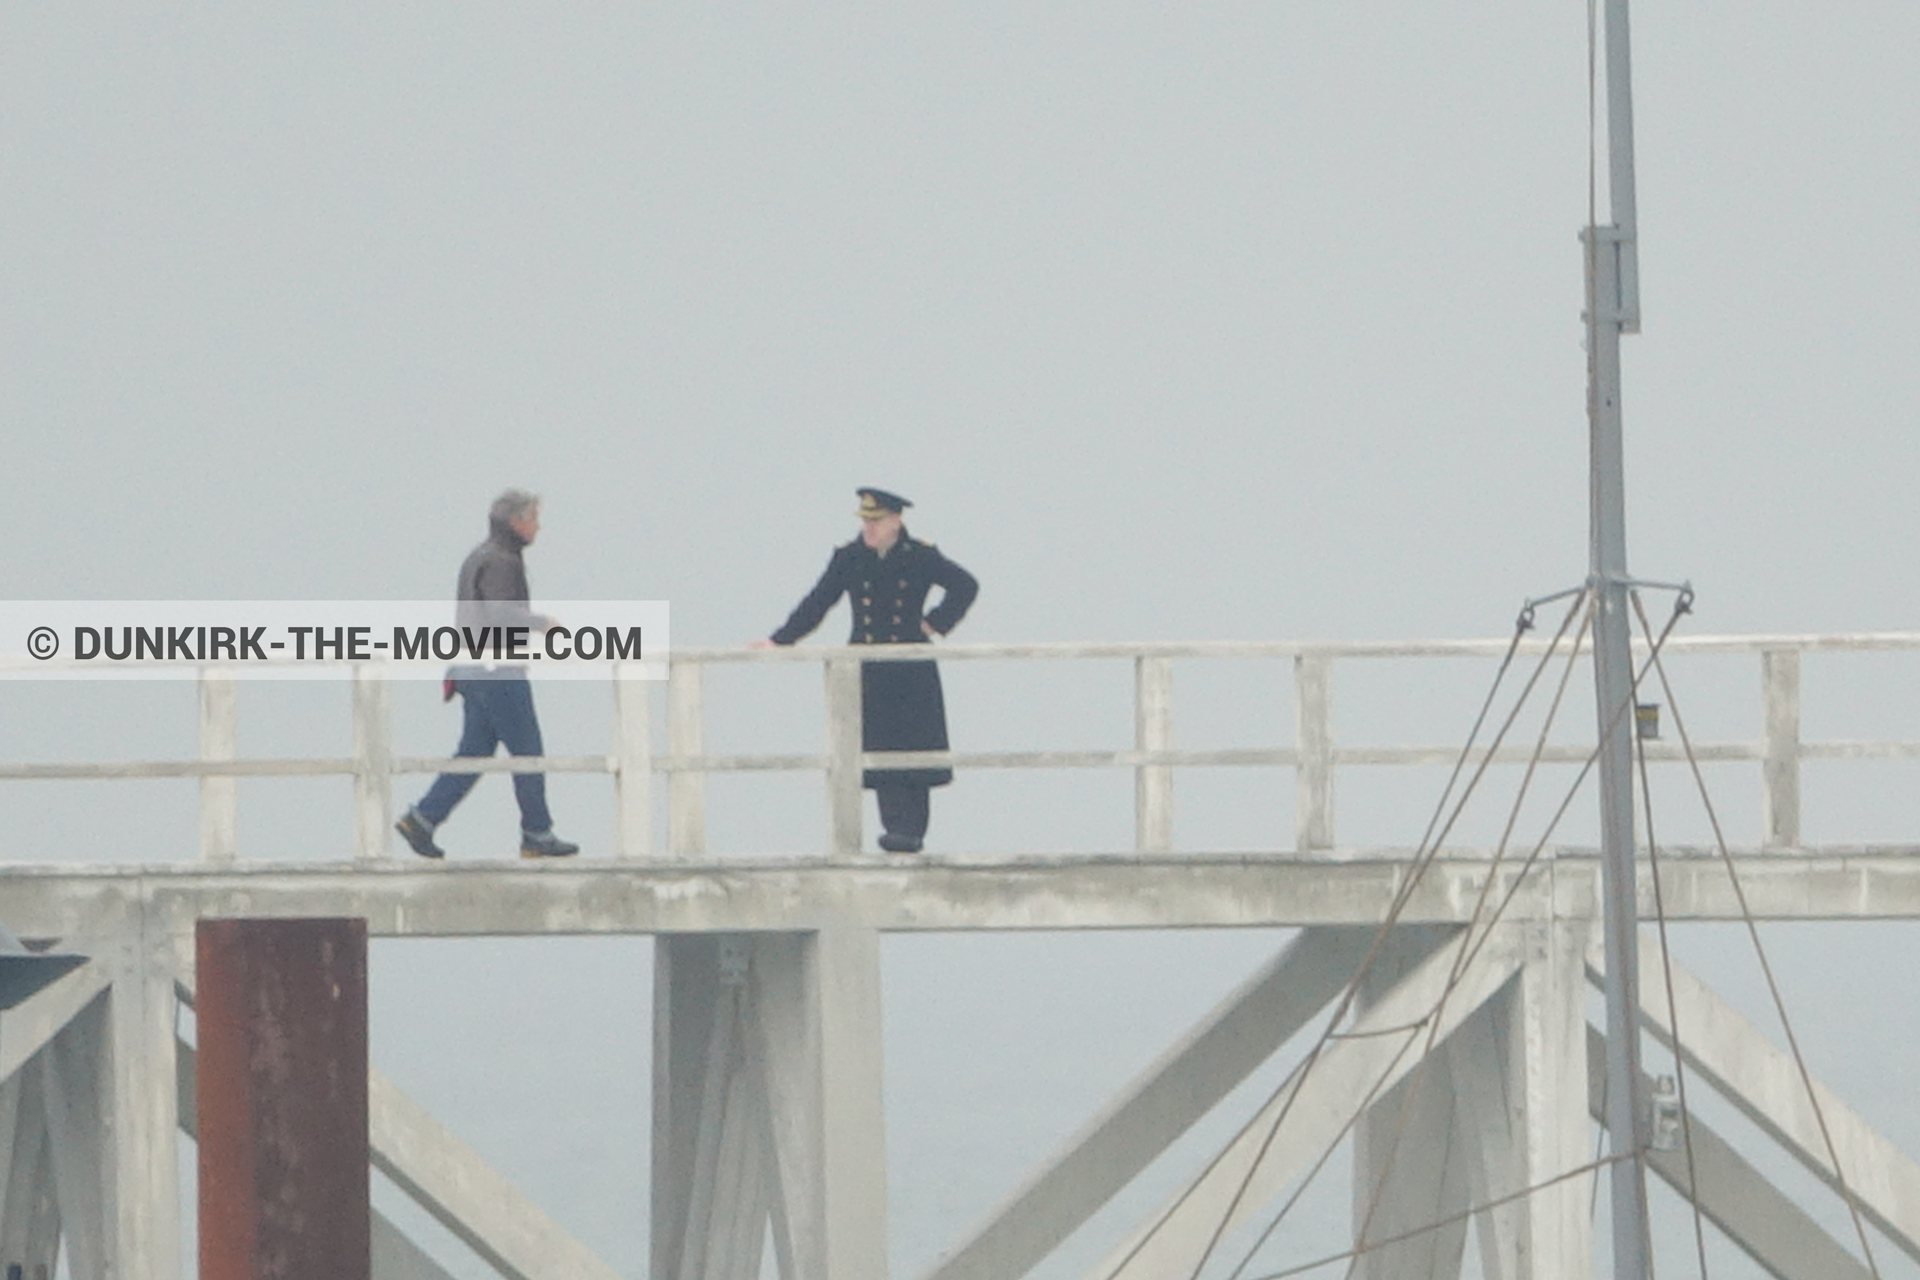 Picture with actor, grey sky, EST pier, Kenneth Branagh, technical team, Nilo Otero,  from behind the scene of the Dunkirk movie by Nolan